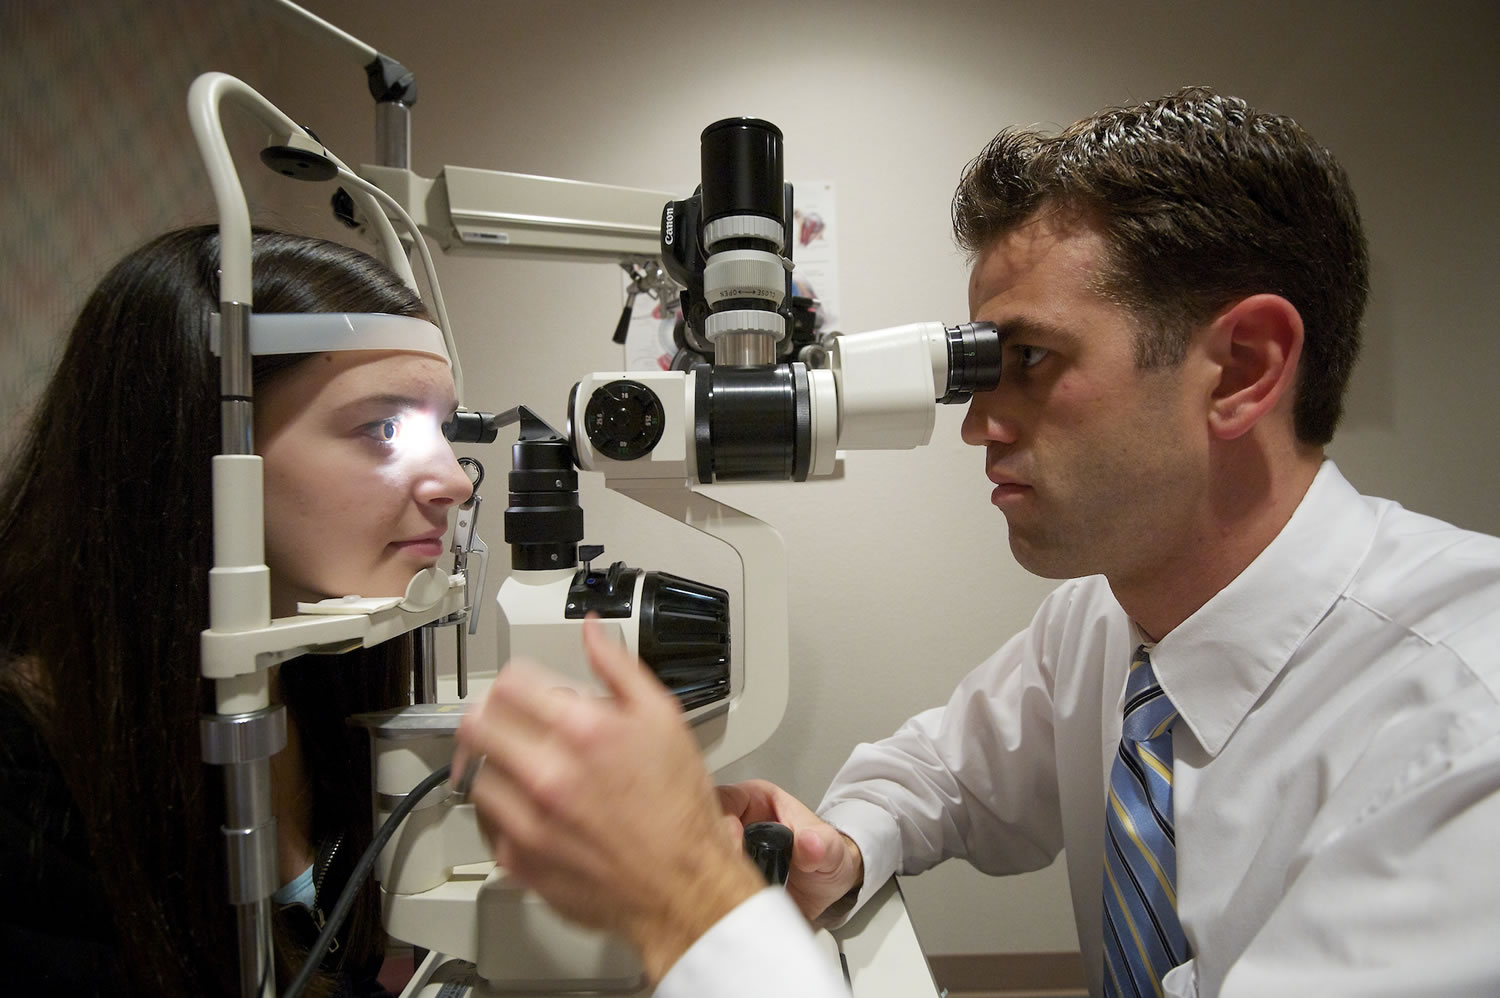 Brett Richardson examines Marina Kondratyuk, 15, during a routine eye exam at the Richardson Eye and Contact Lens Clinic in Vancouver. Below, Todd Richardson uses a new scanning laser machine to view the retina image and other parts of an eye.